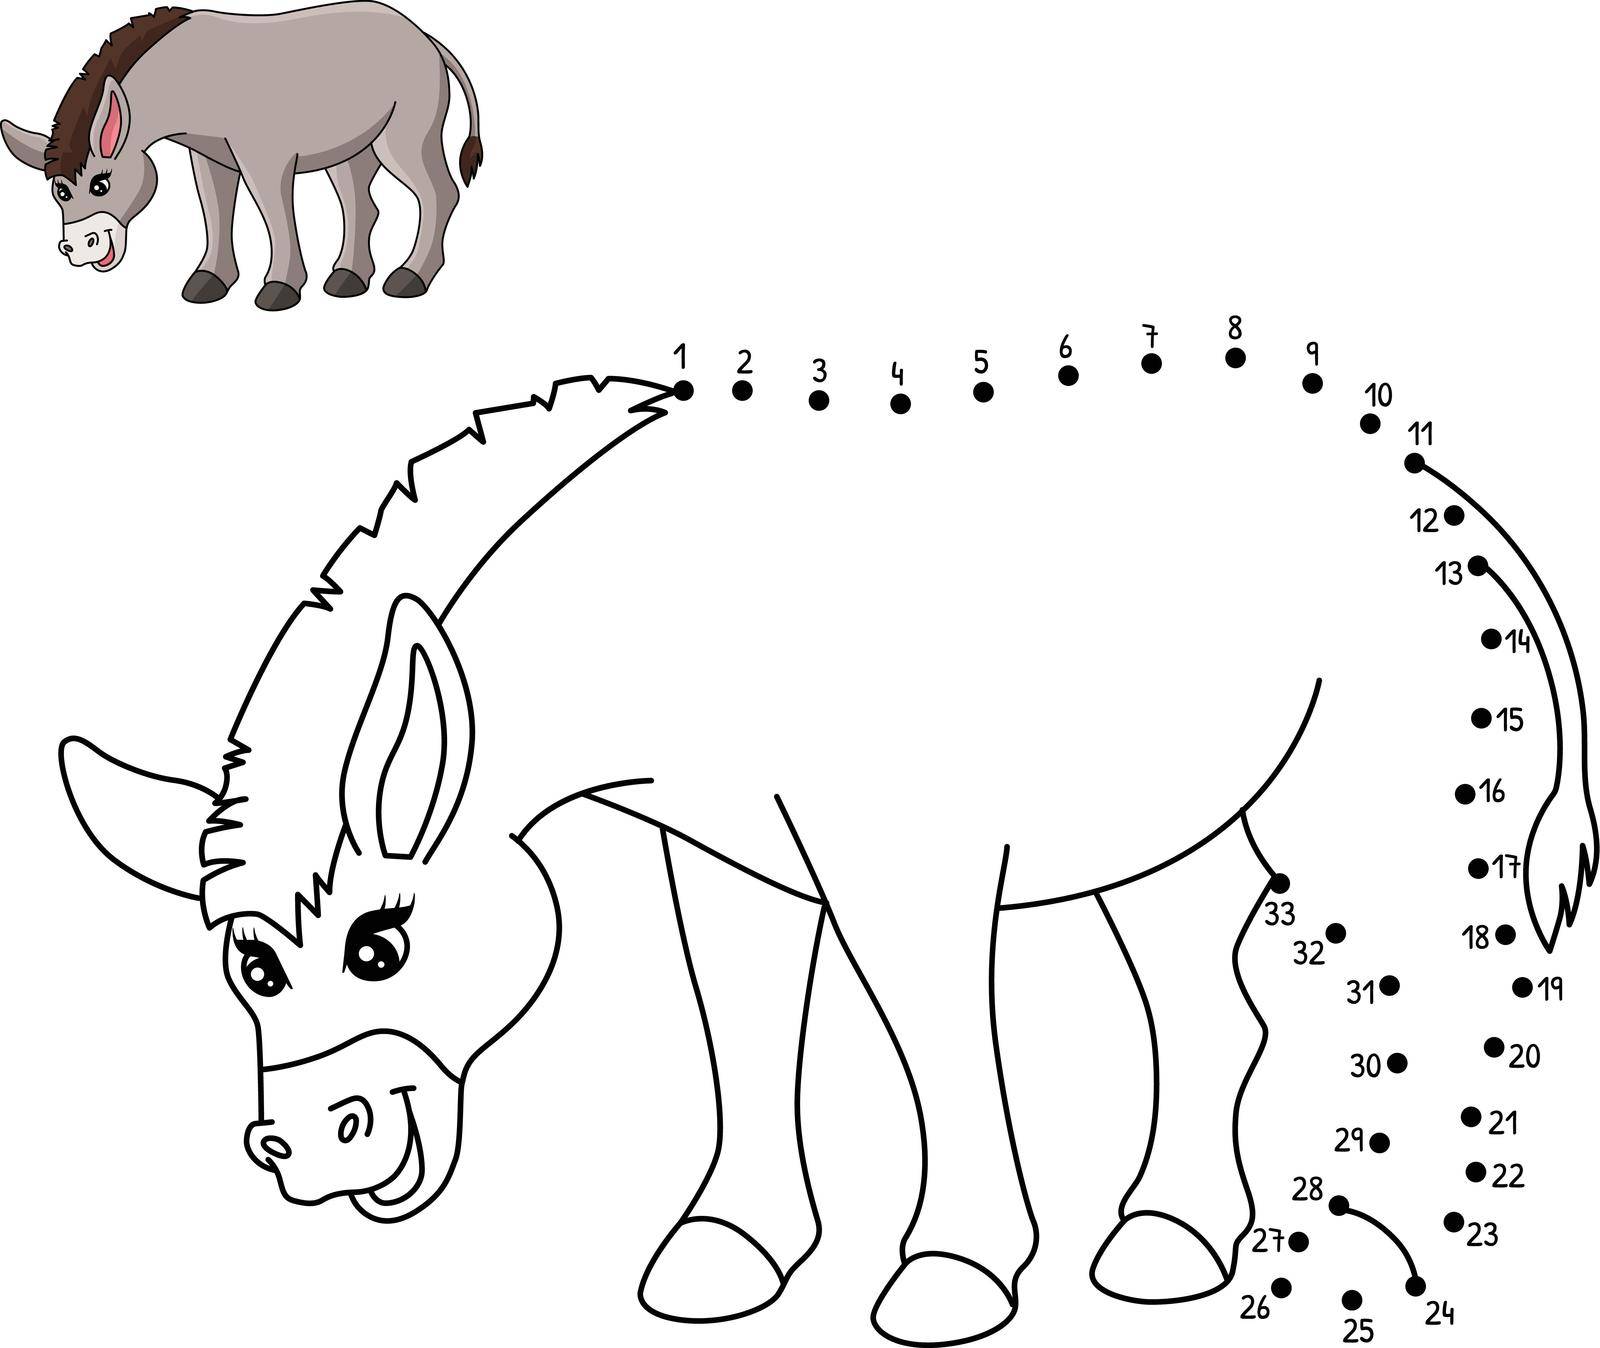 A cute and funny connect-the-dots coloring page of a Donkey. Provides hours of coloring fun for children. Color, this page is very easy. Suitable for little kids and toddlers.